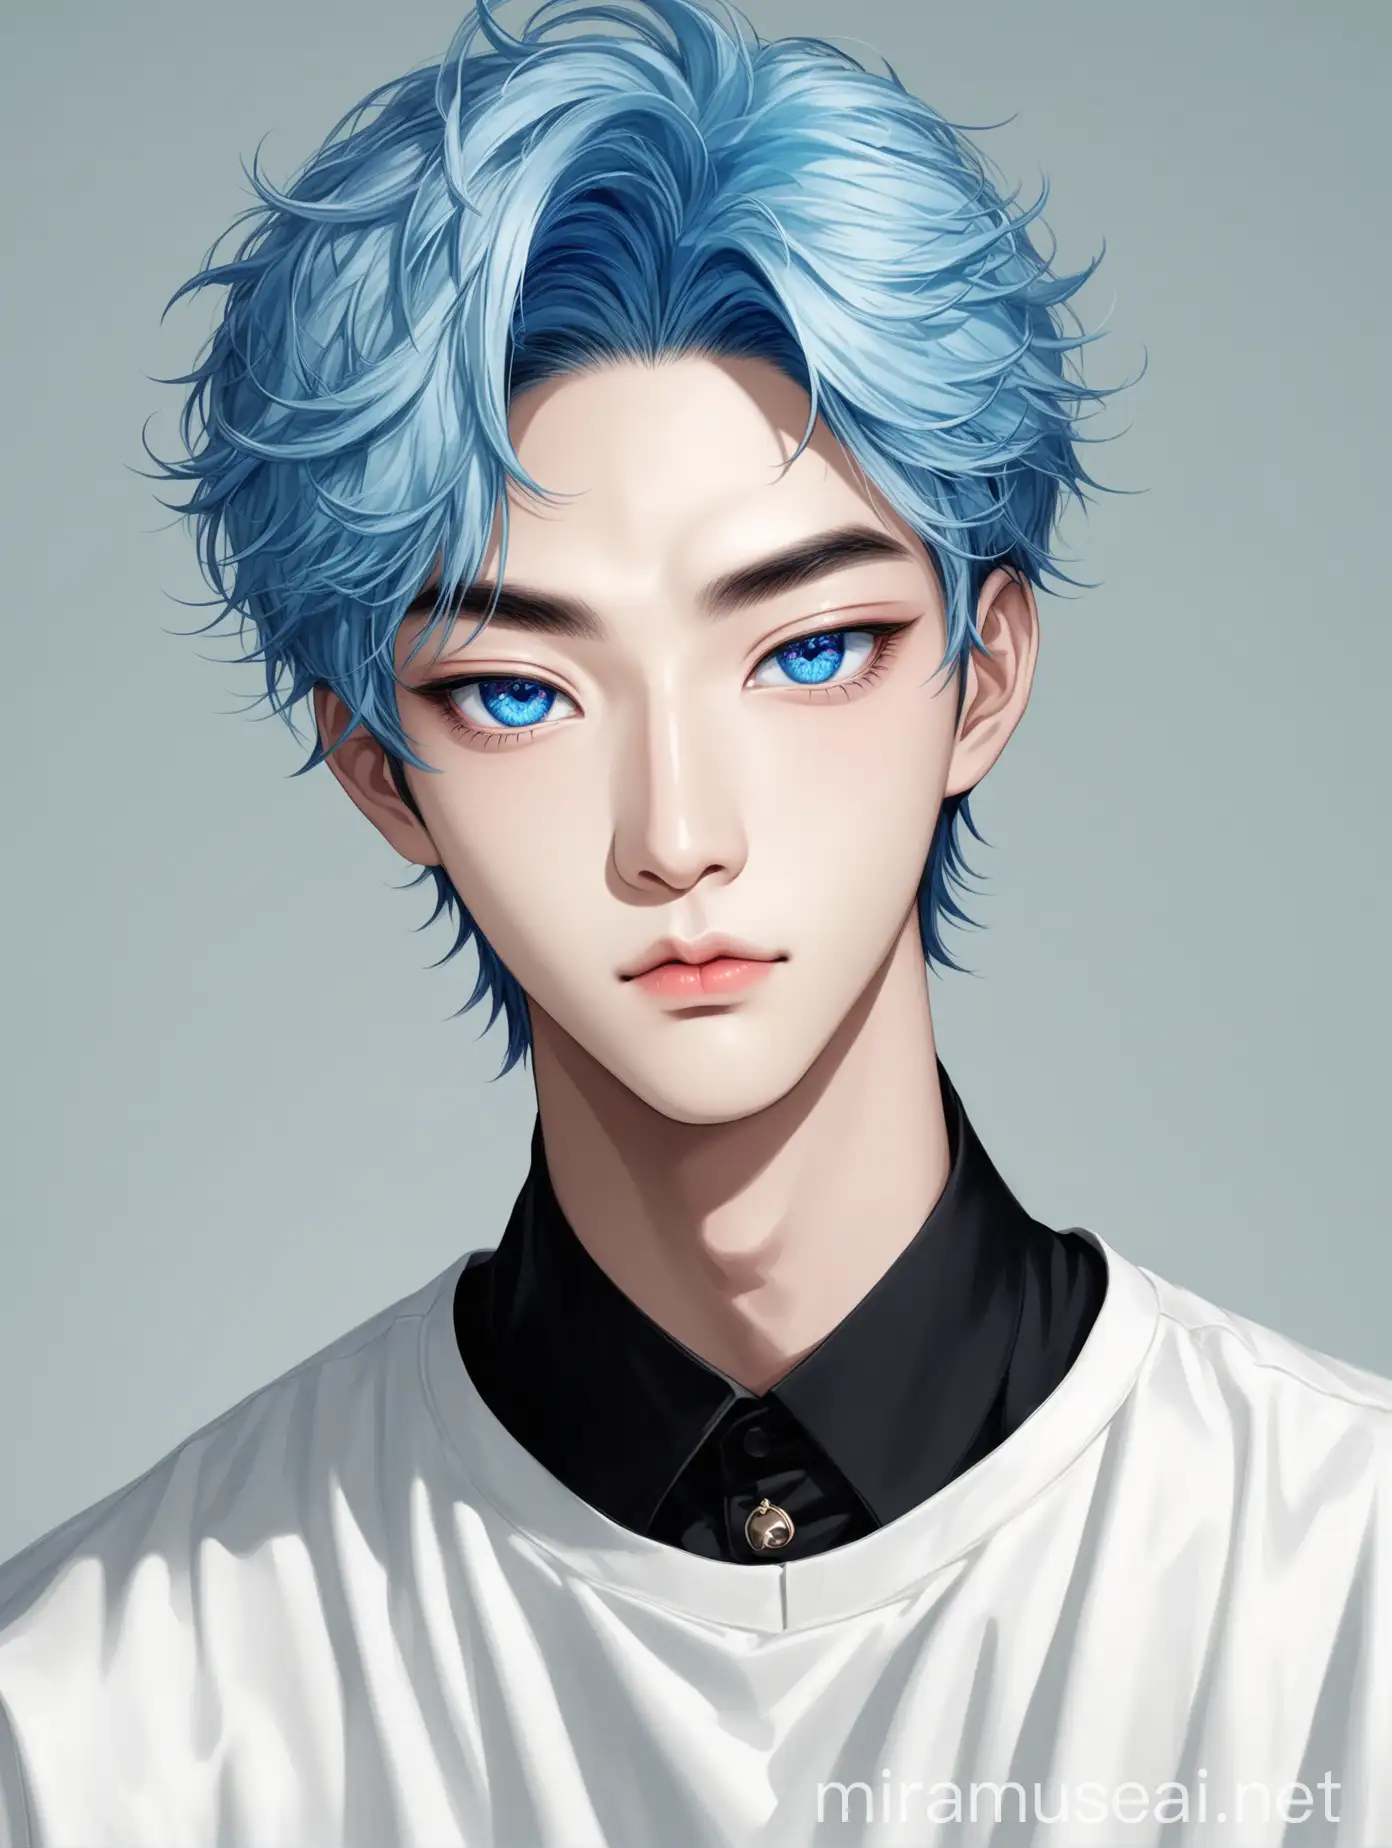 A very handsome attractive cool elegant looking Korean kpop male idol, facial features: (blue hair, sea blue eyes, straight upturned nose, monolid big doe almond eyes, lower fuller lips, round borderlining heart shaped small face, straight eyebrows 
)Wearing black long coat with belt with white tshirt inside, tight skinny black pants ,boots